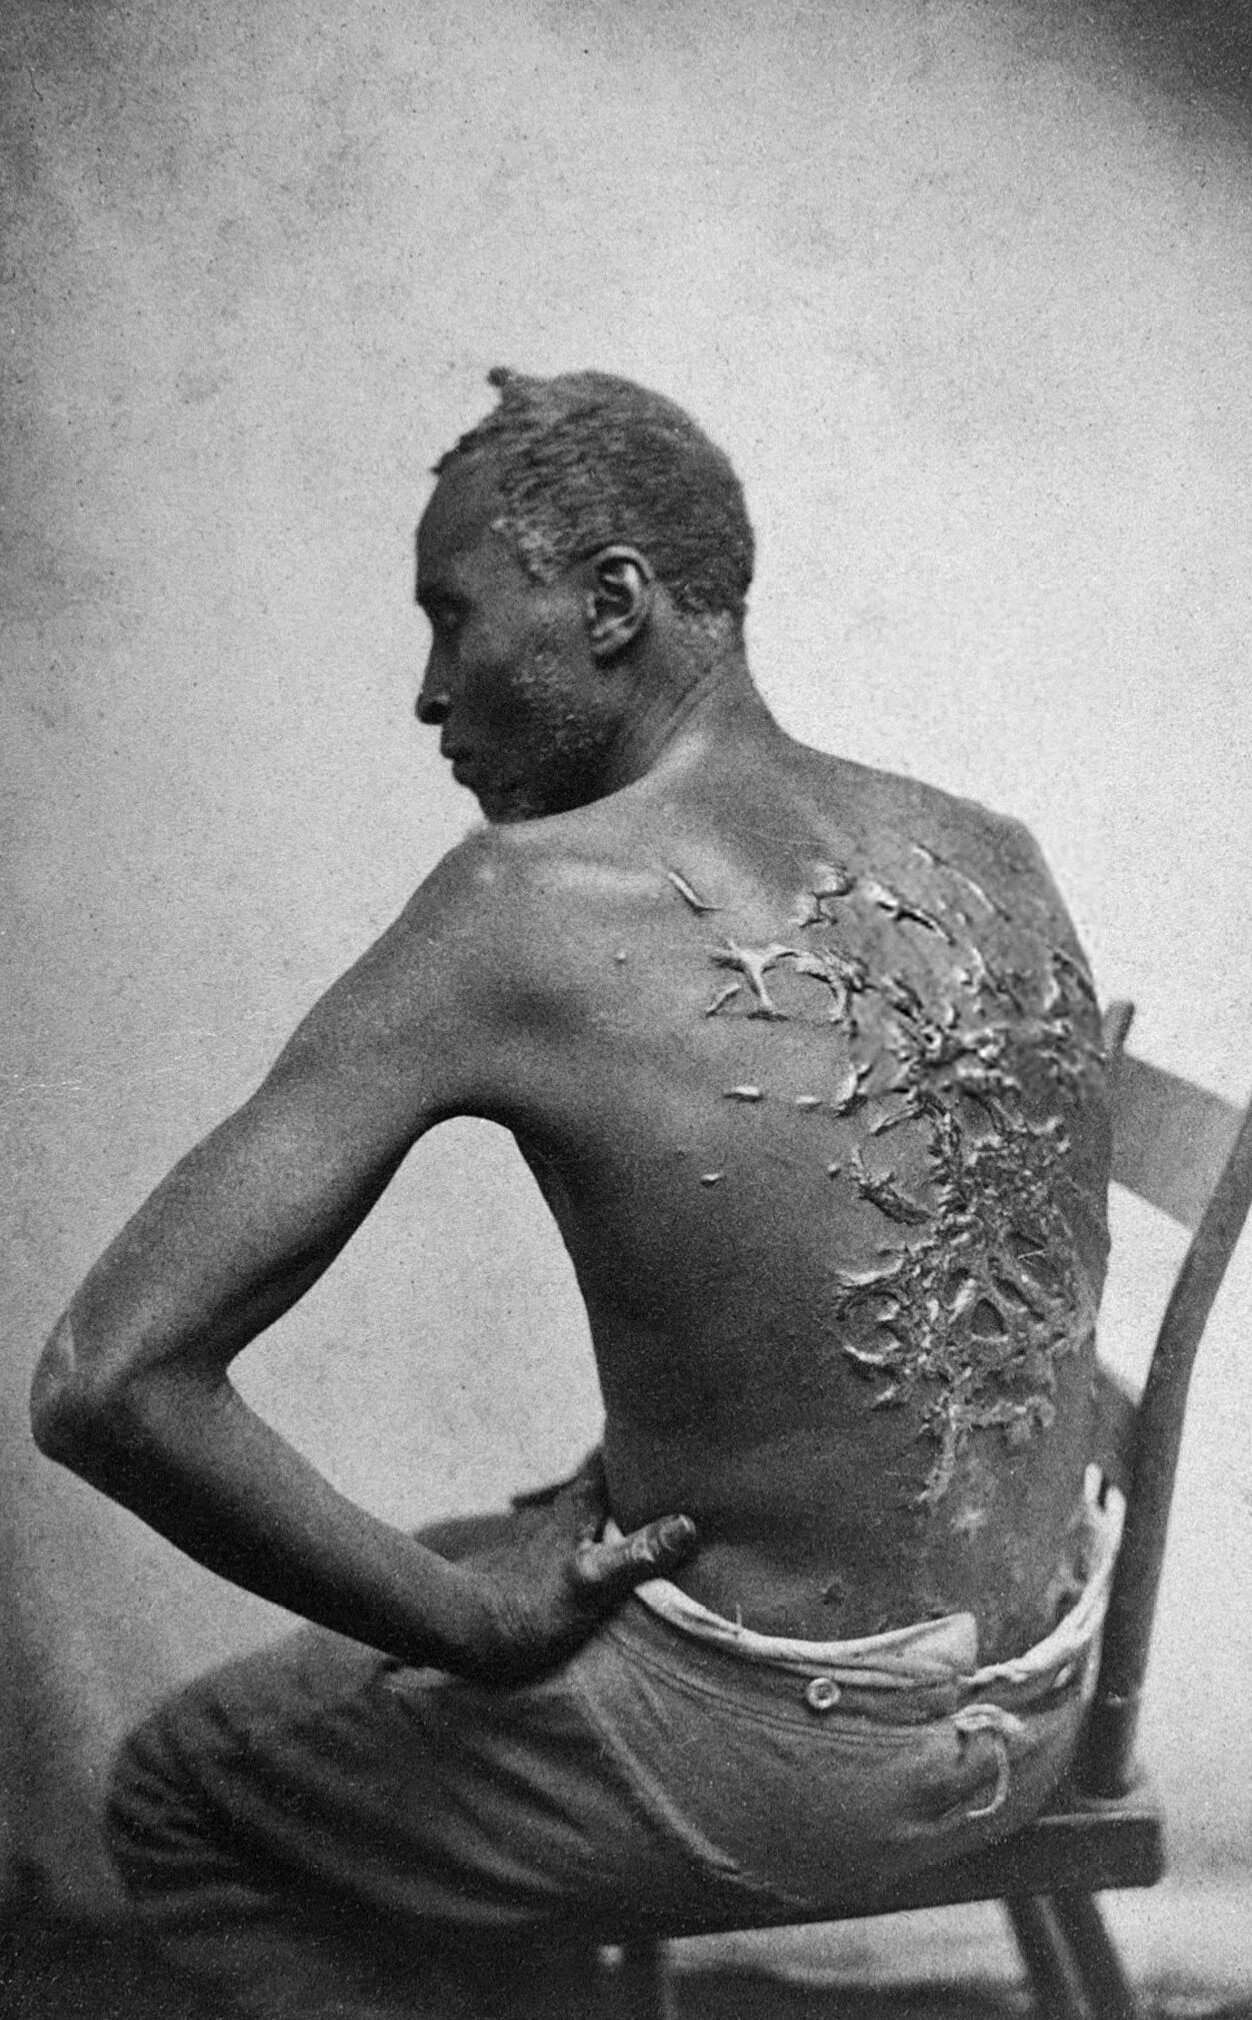 101 Scourged_back_by_McPherson_&_Oliver,_1863,_retouched.jpg